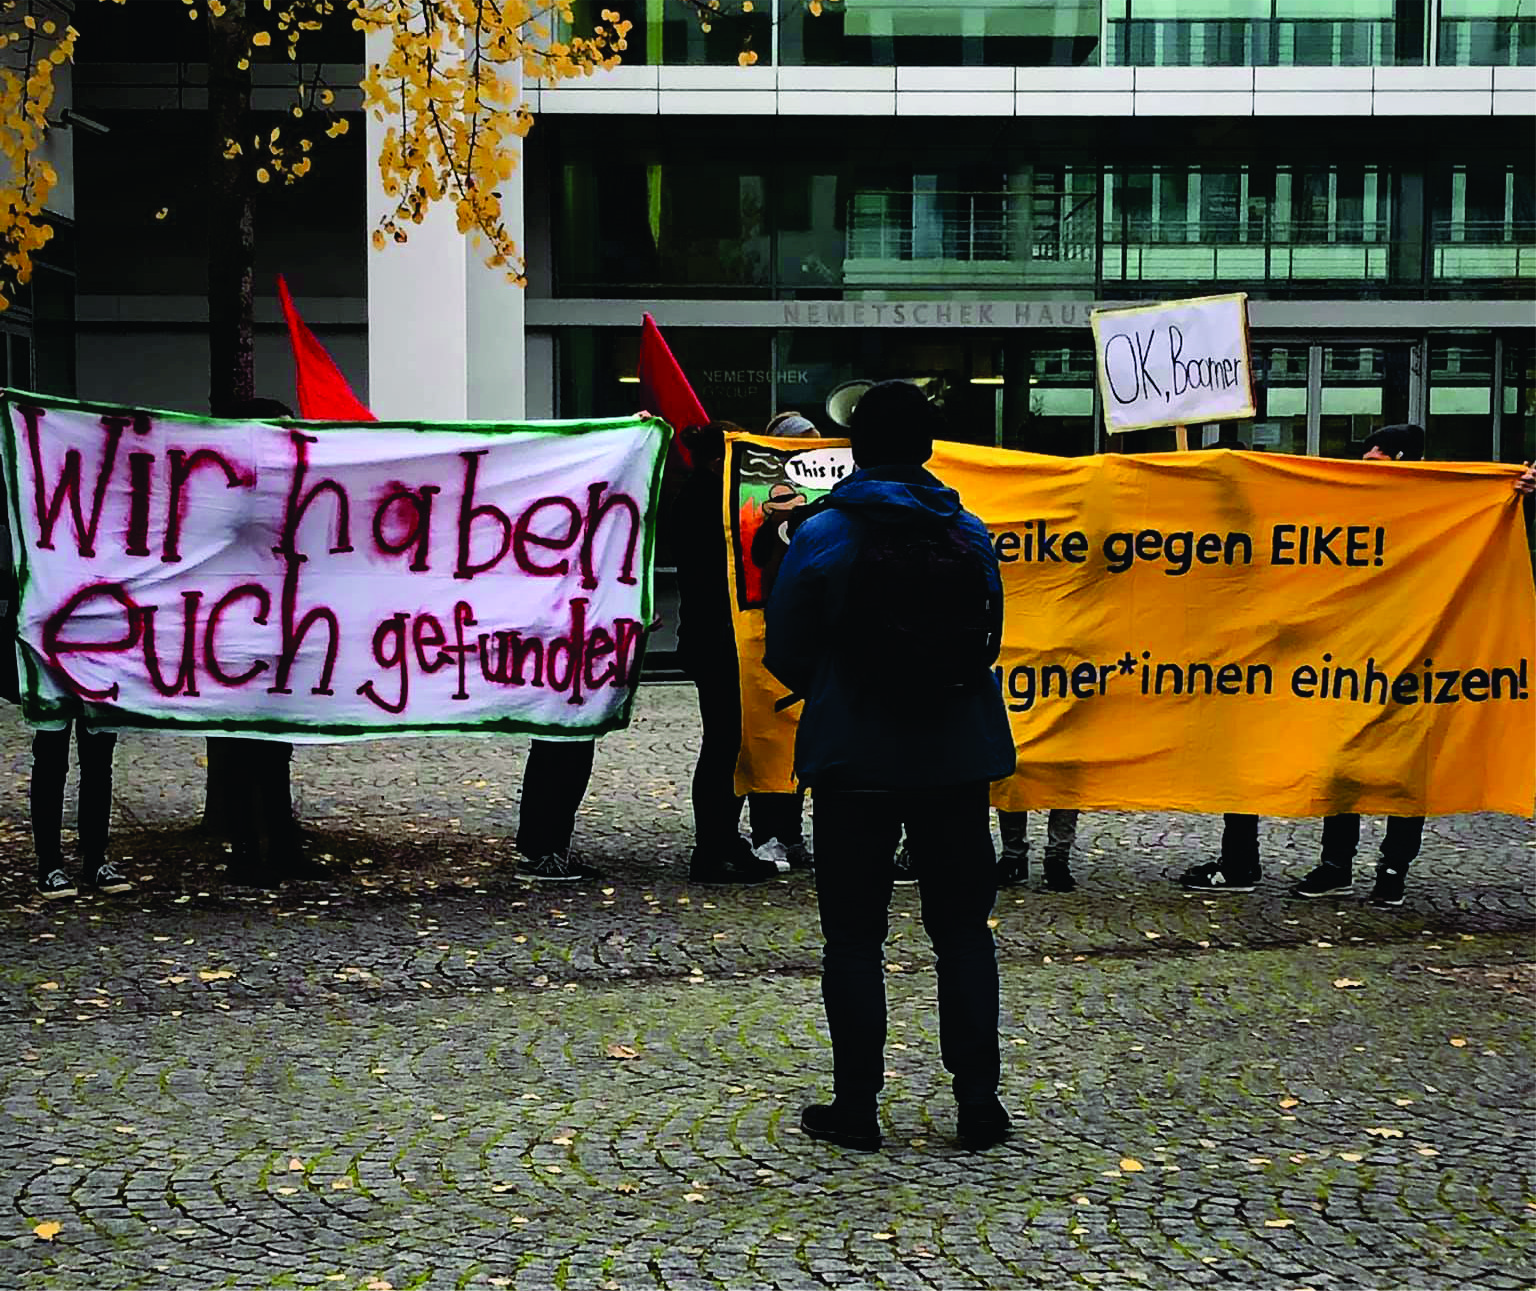 Radicals fail to silence German scientific conference